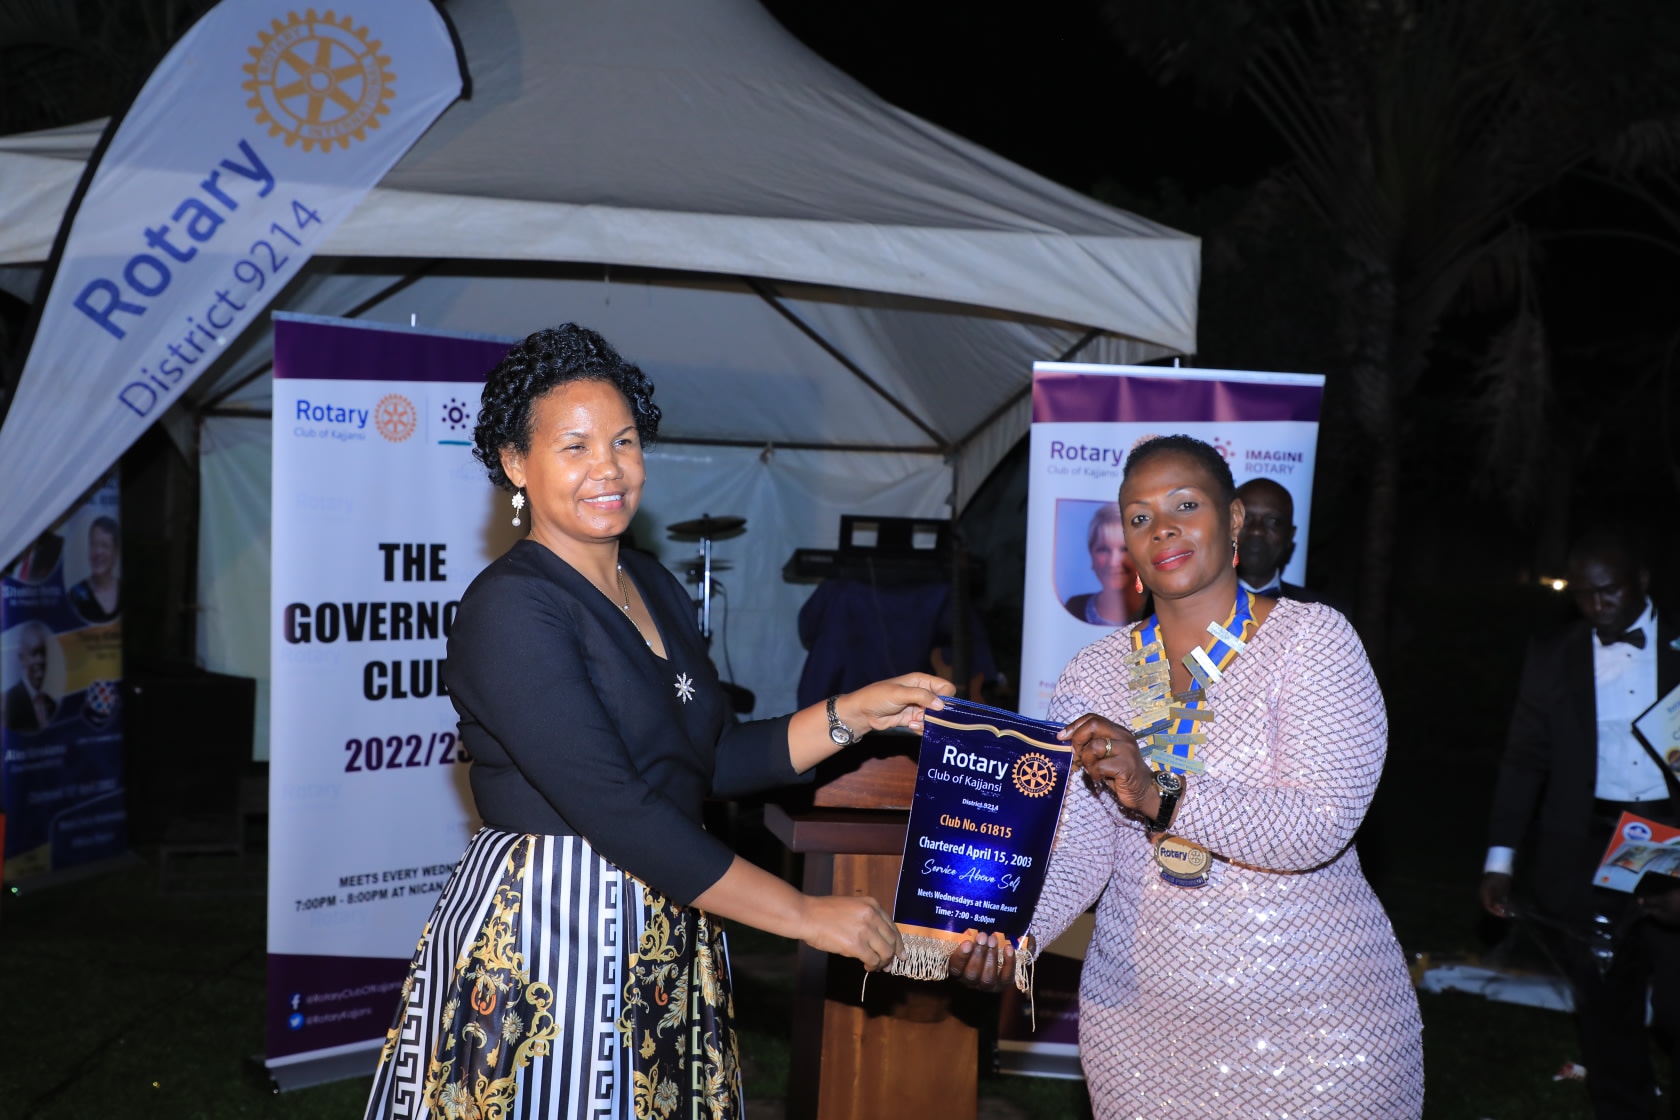 Economic , social devt as fostered by Rotary in Uganda